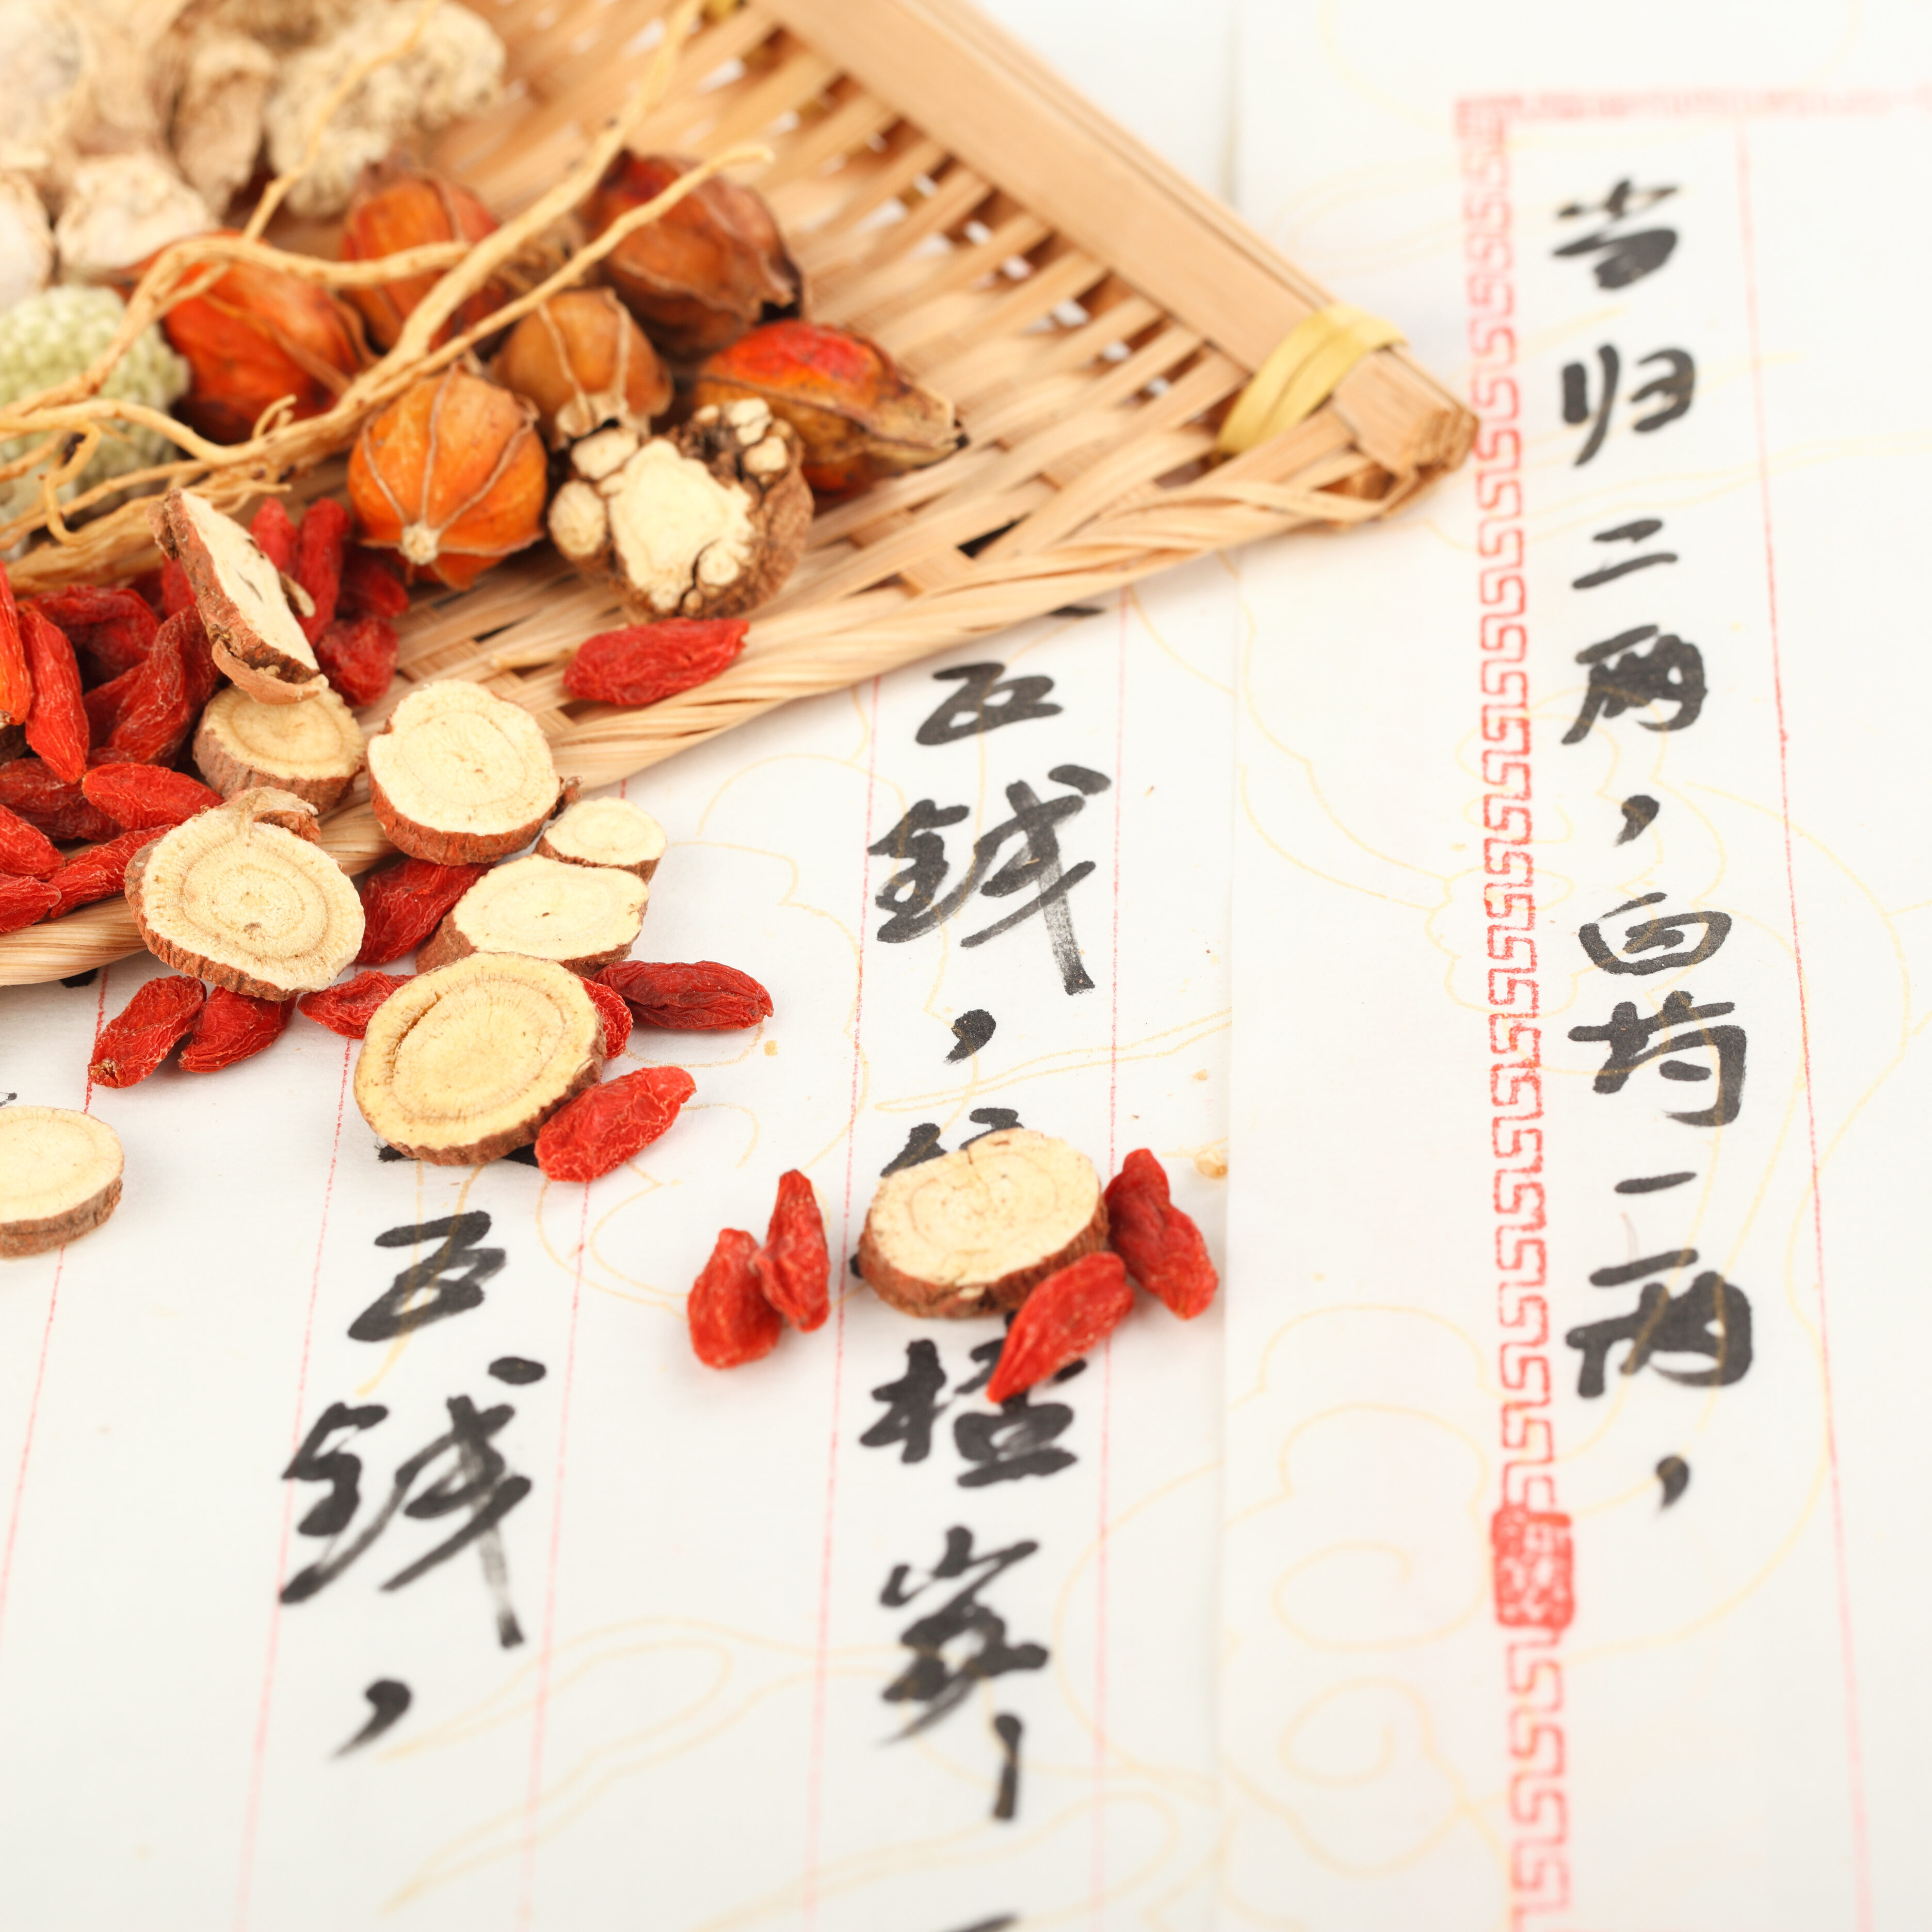 Traditional Chinese medicine with prescription